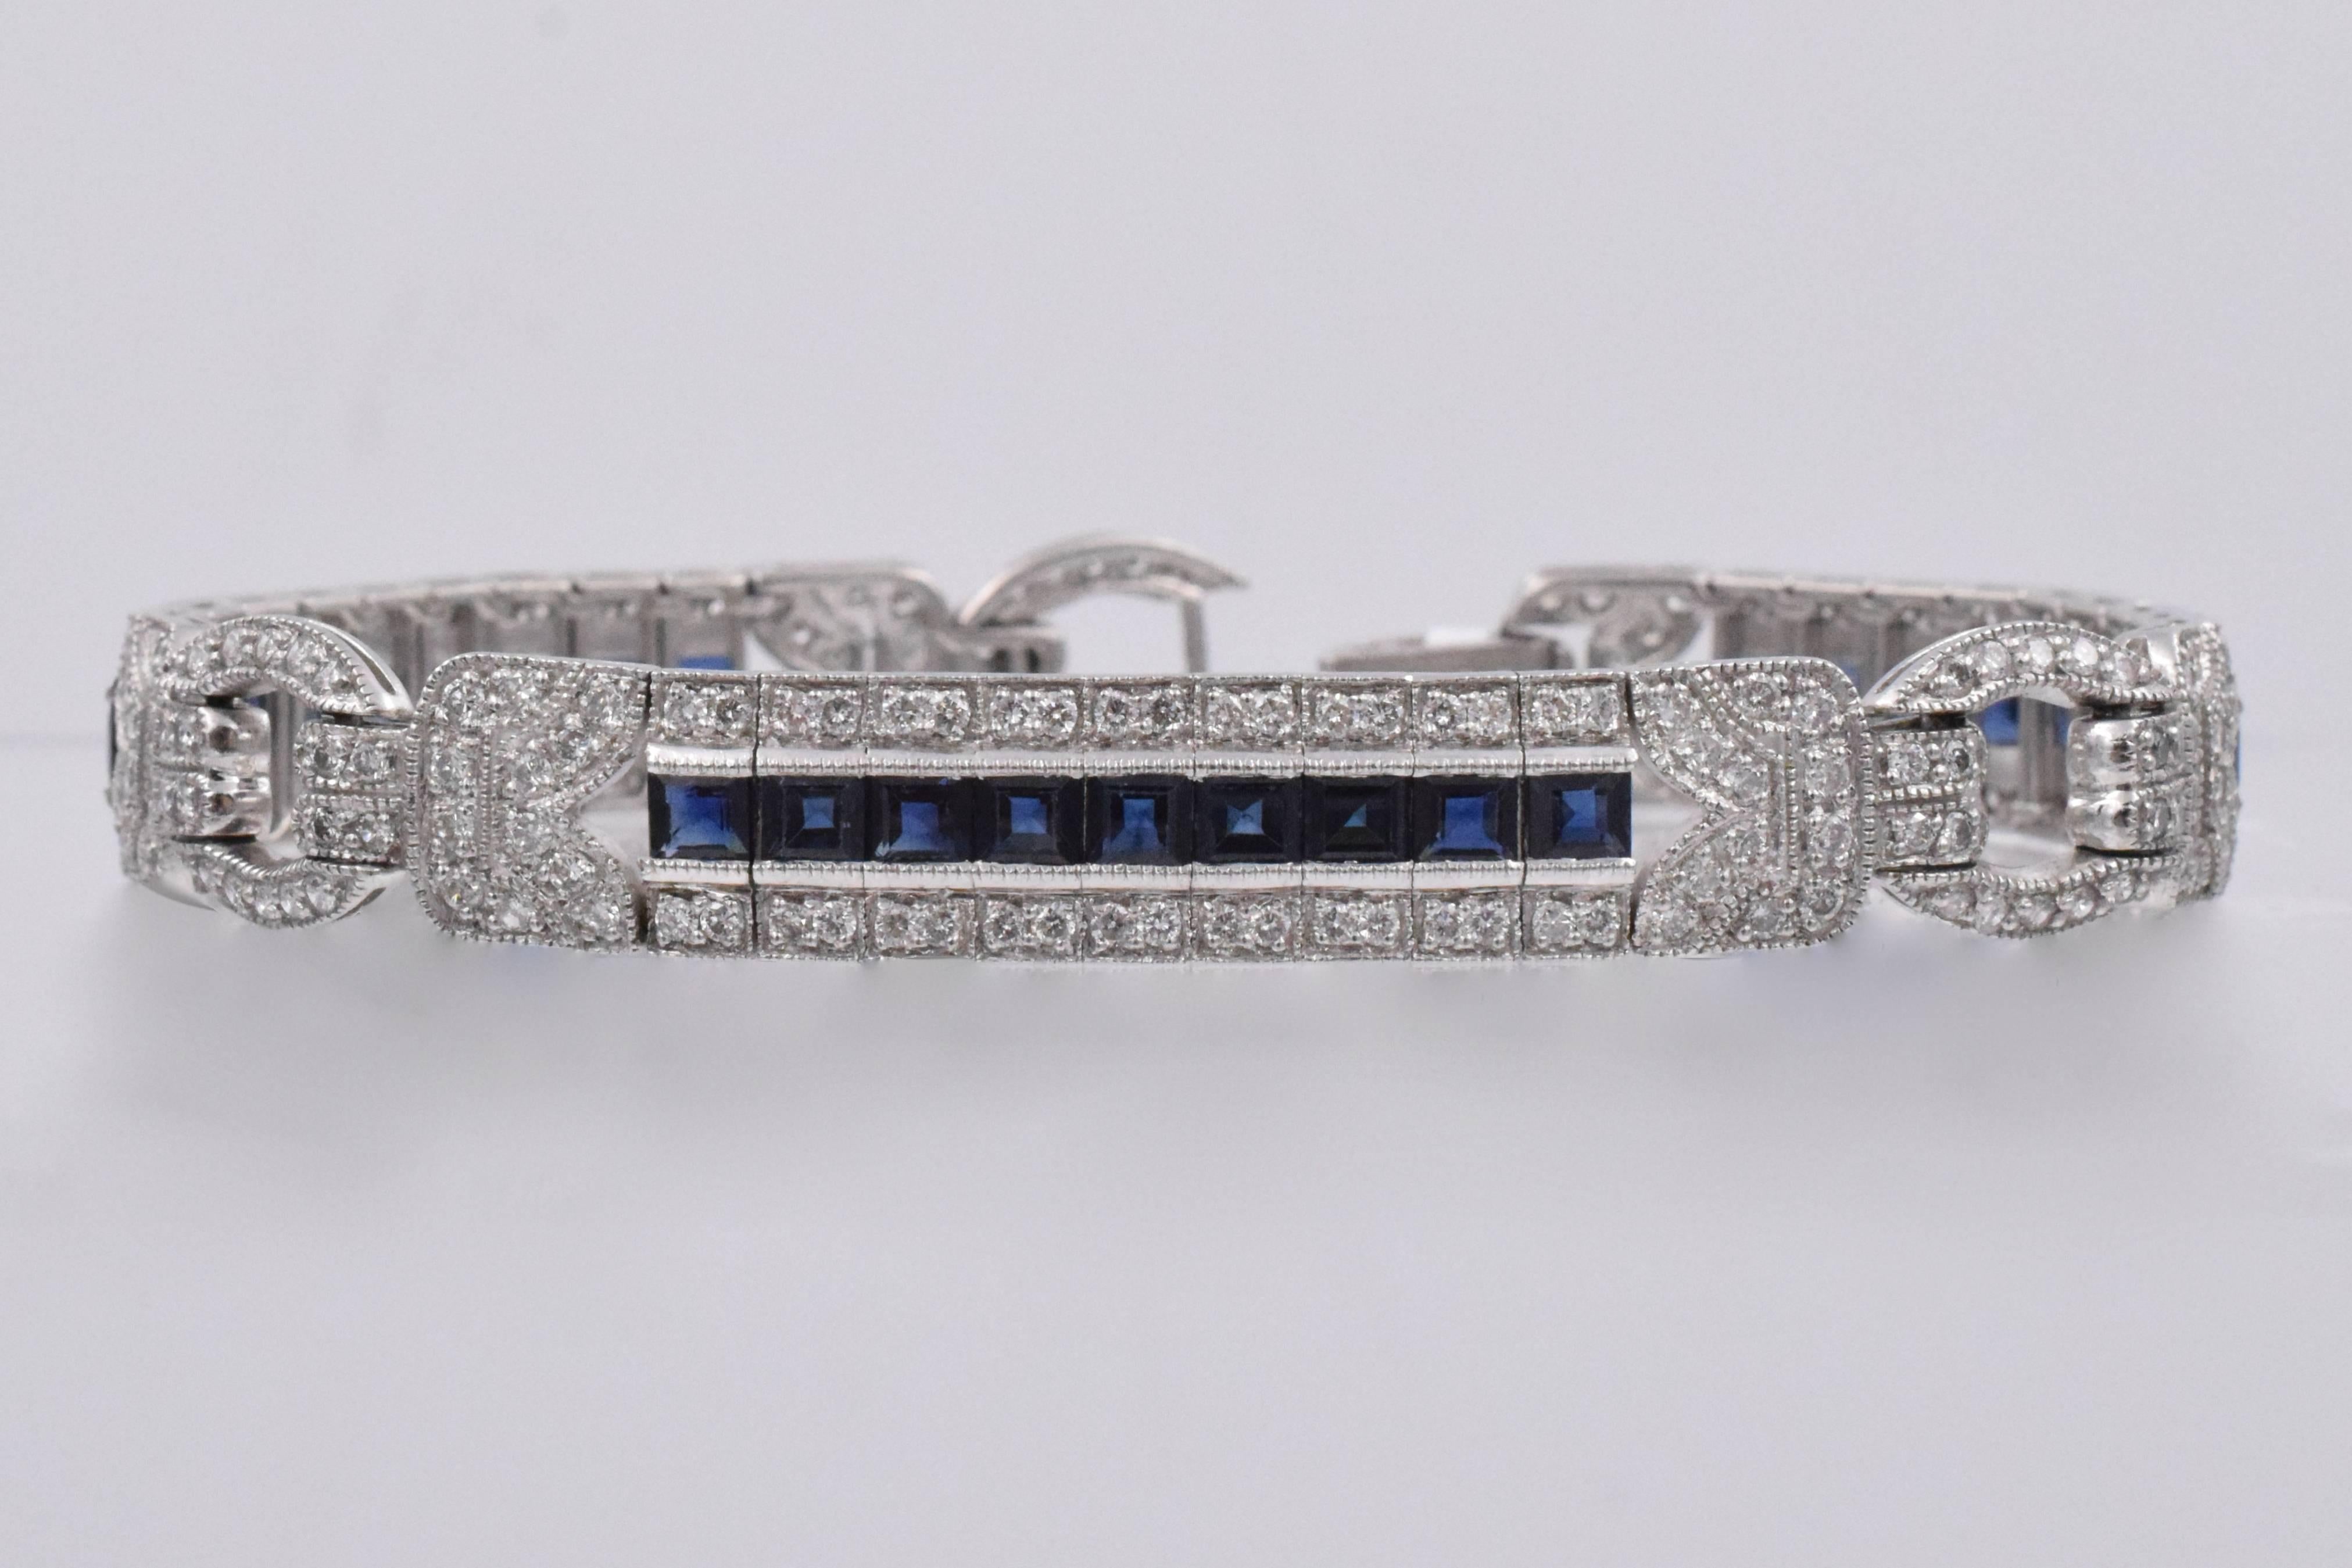 Cl;aspic three sectional sapphire and diamond  bracelet and diamond bracelet
.each section has channel set french cut sapphires surrounded by pave set brilliant diamonds.
Estimated total sapphire weight is 8.25 carats and diamonds is 3.70